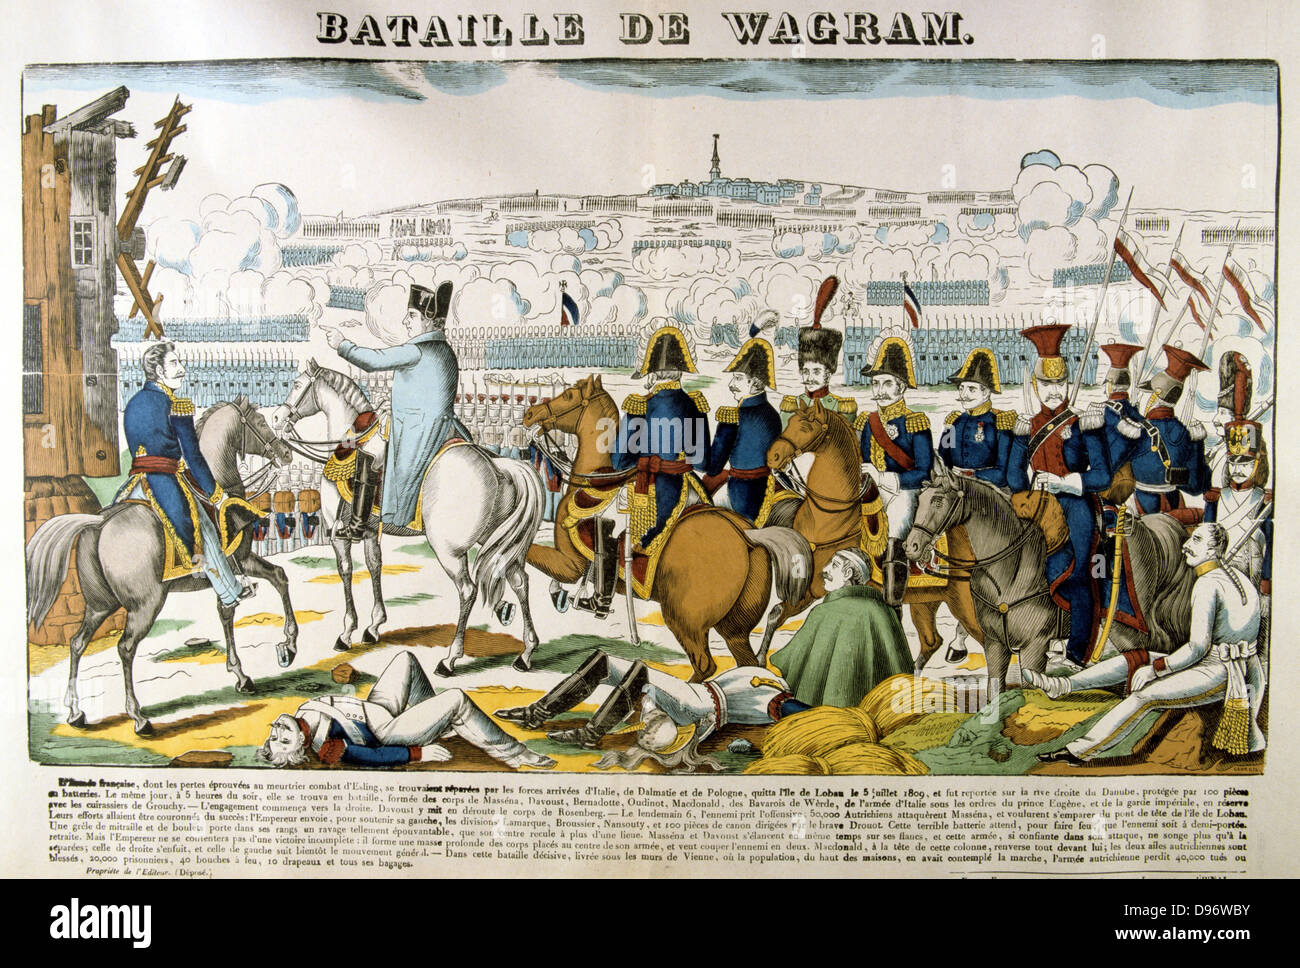 Napoleon at the Battle of Wagram, 5-6 July 1809. Decisive French victory under Napoleon over the Austrians under Archduke Charles led to Armistice of Zniam. Popular French hand-coloured woodcut. Stock Photo